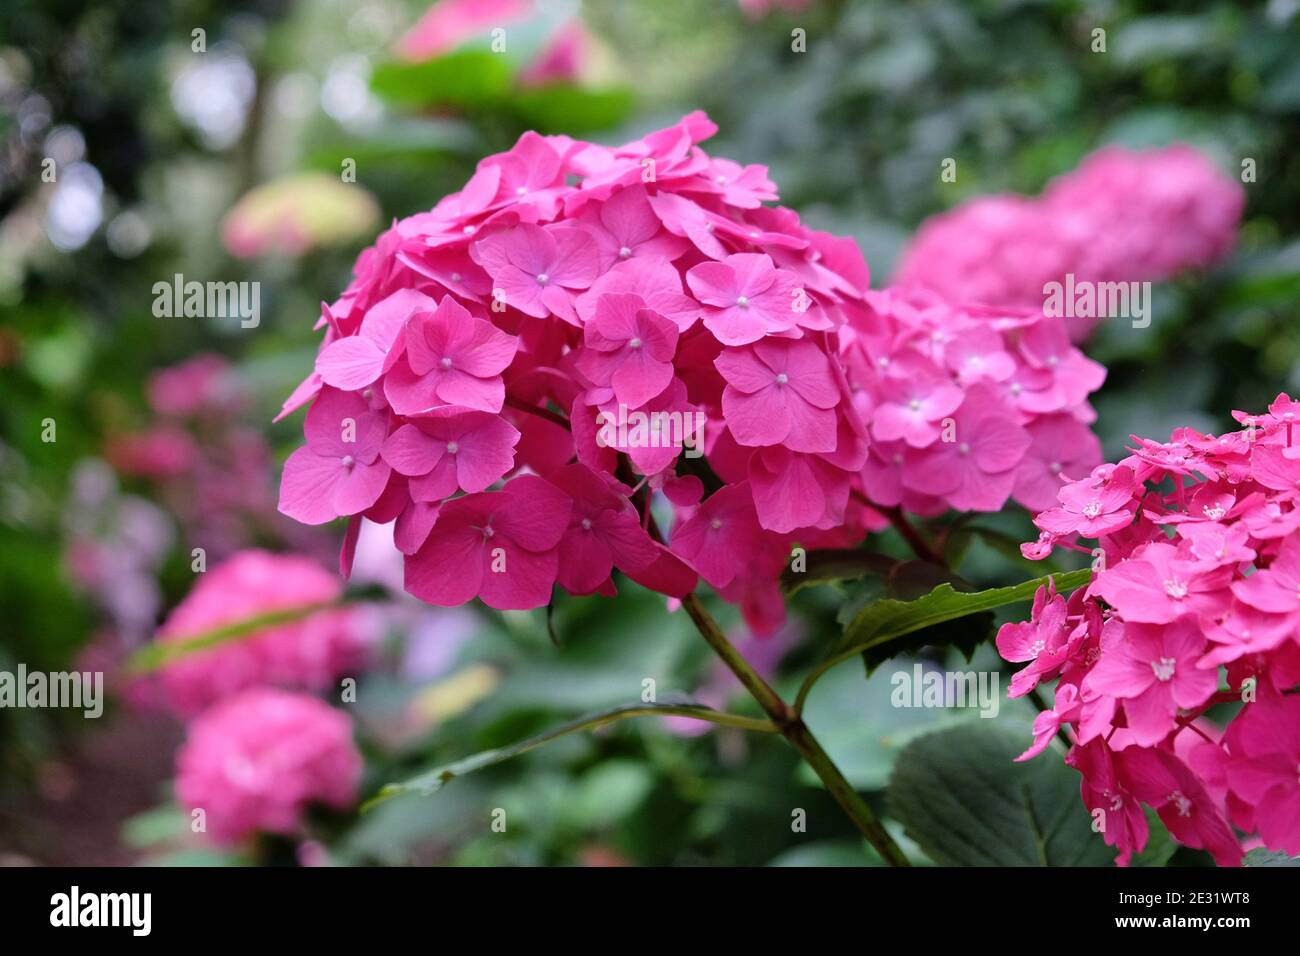 Pink mophead hydrangea flowers in bloom during the summer months Stock Photo